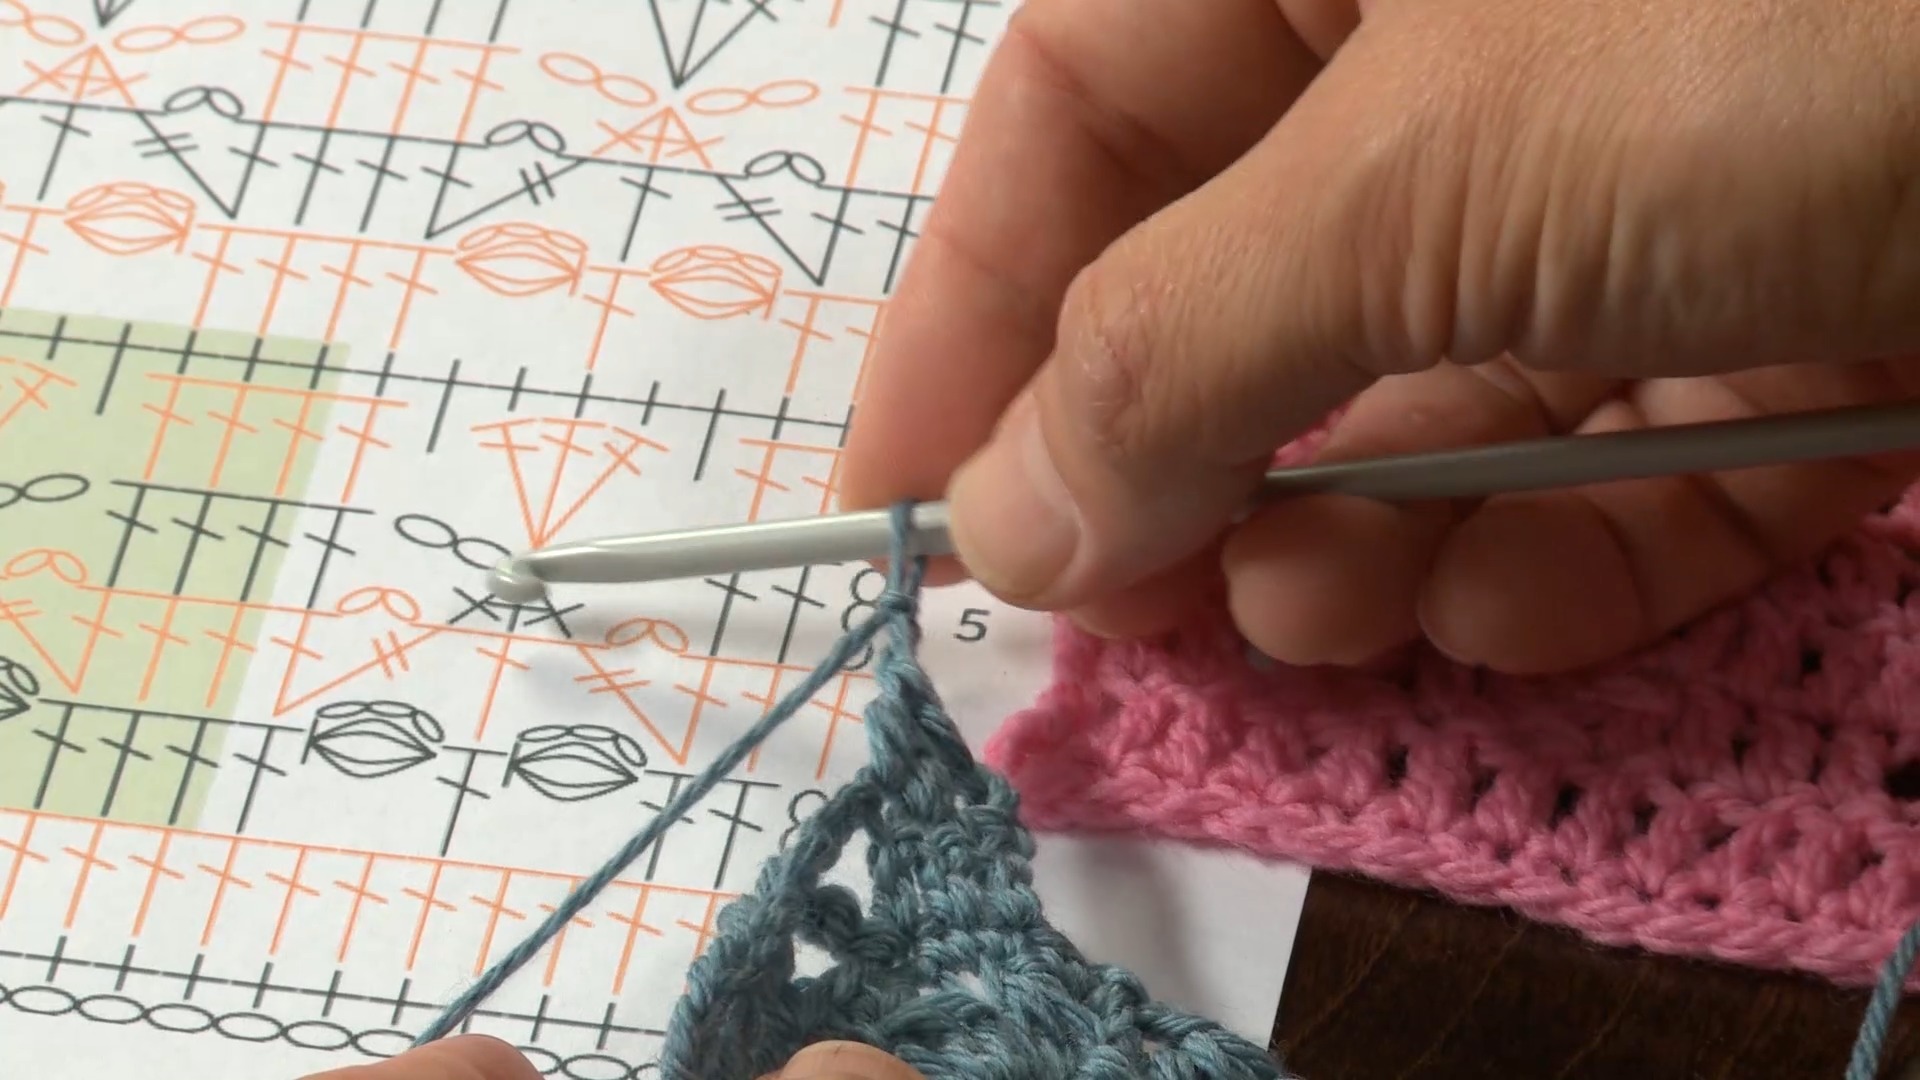 Session 4: Textured Stitch Diagrams